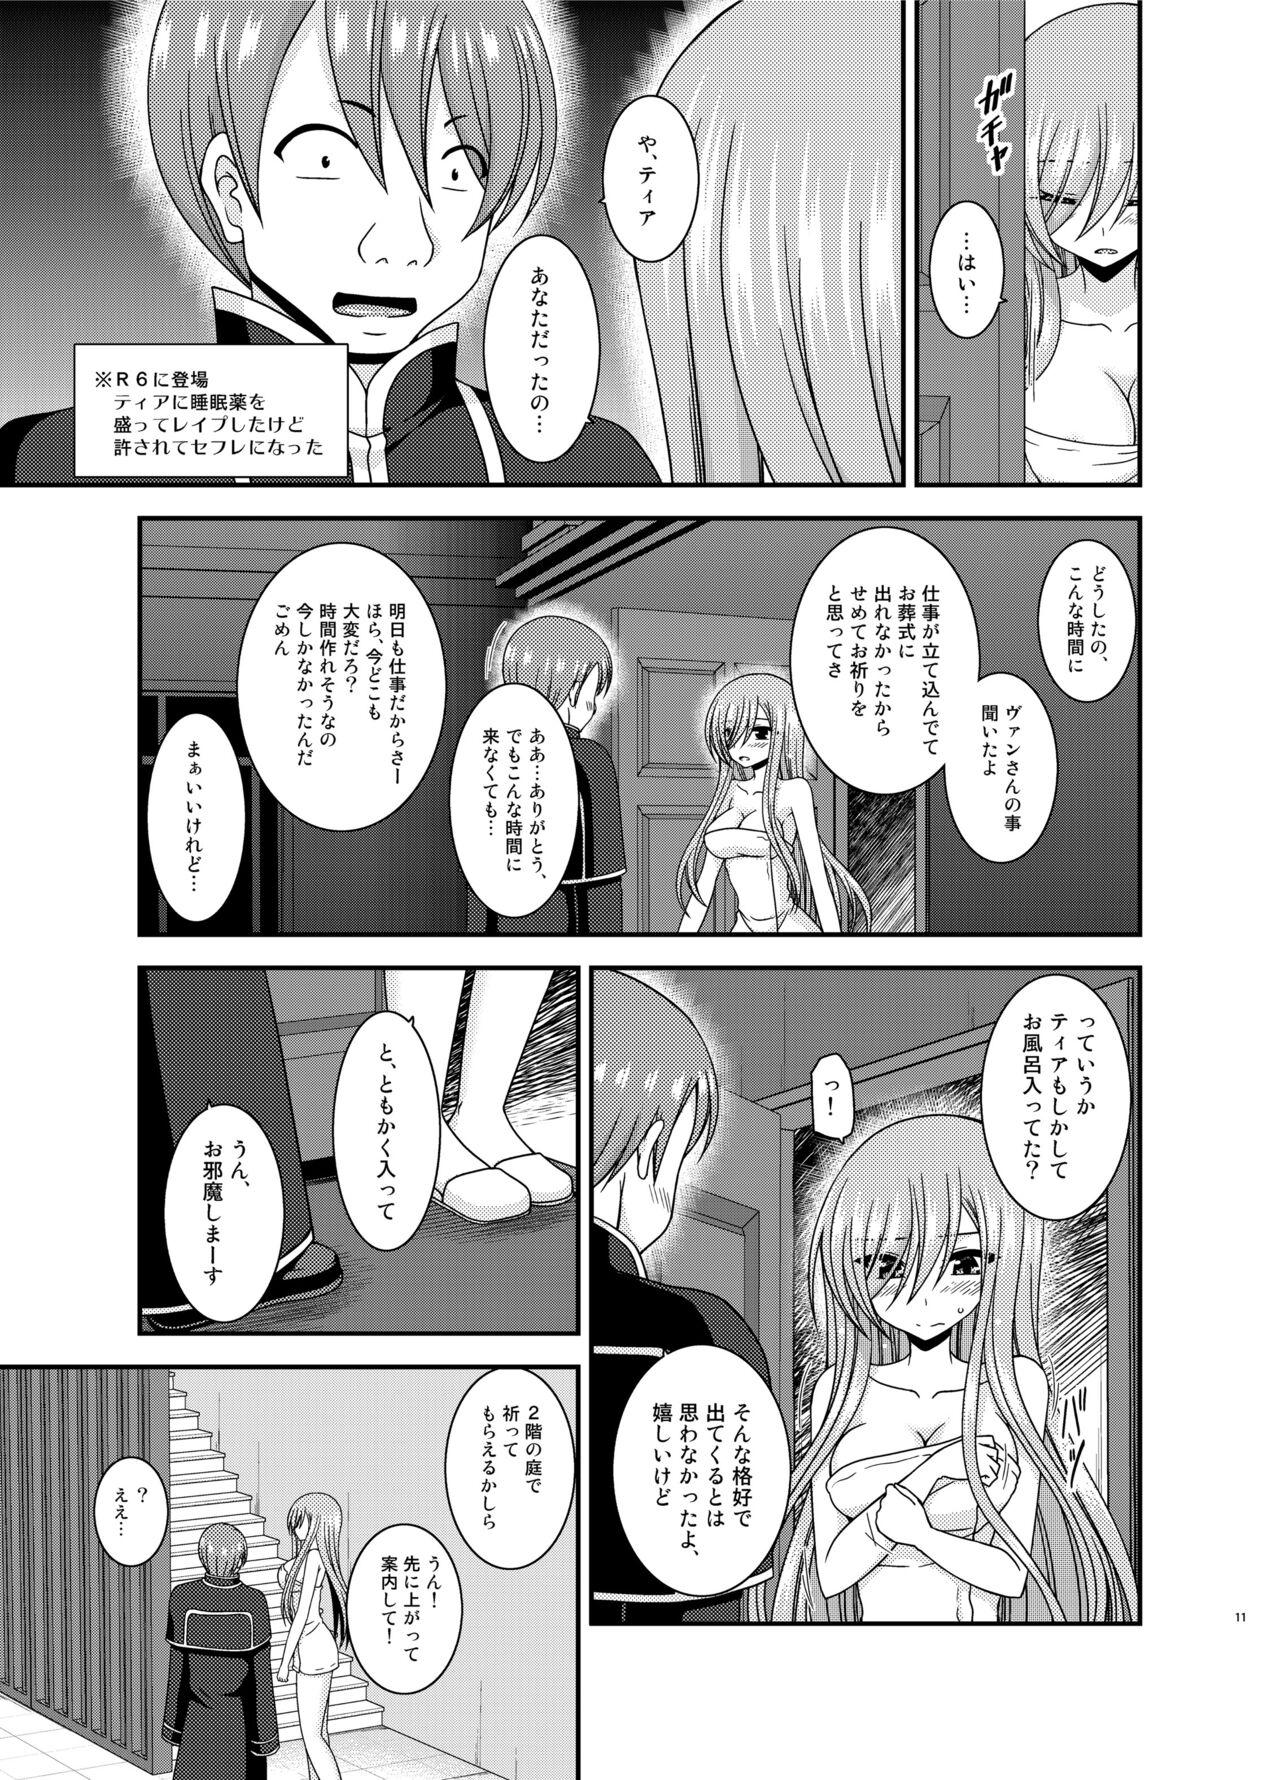 Dirty Talk Melon ga Chou Shindou! R15 - Tales of the abyss Vaginal - Page 11